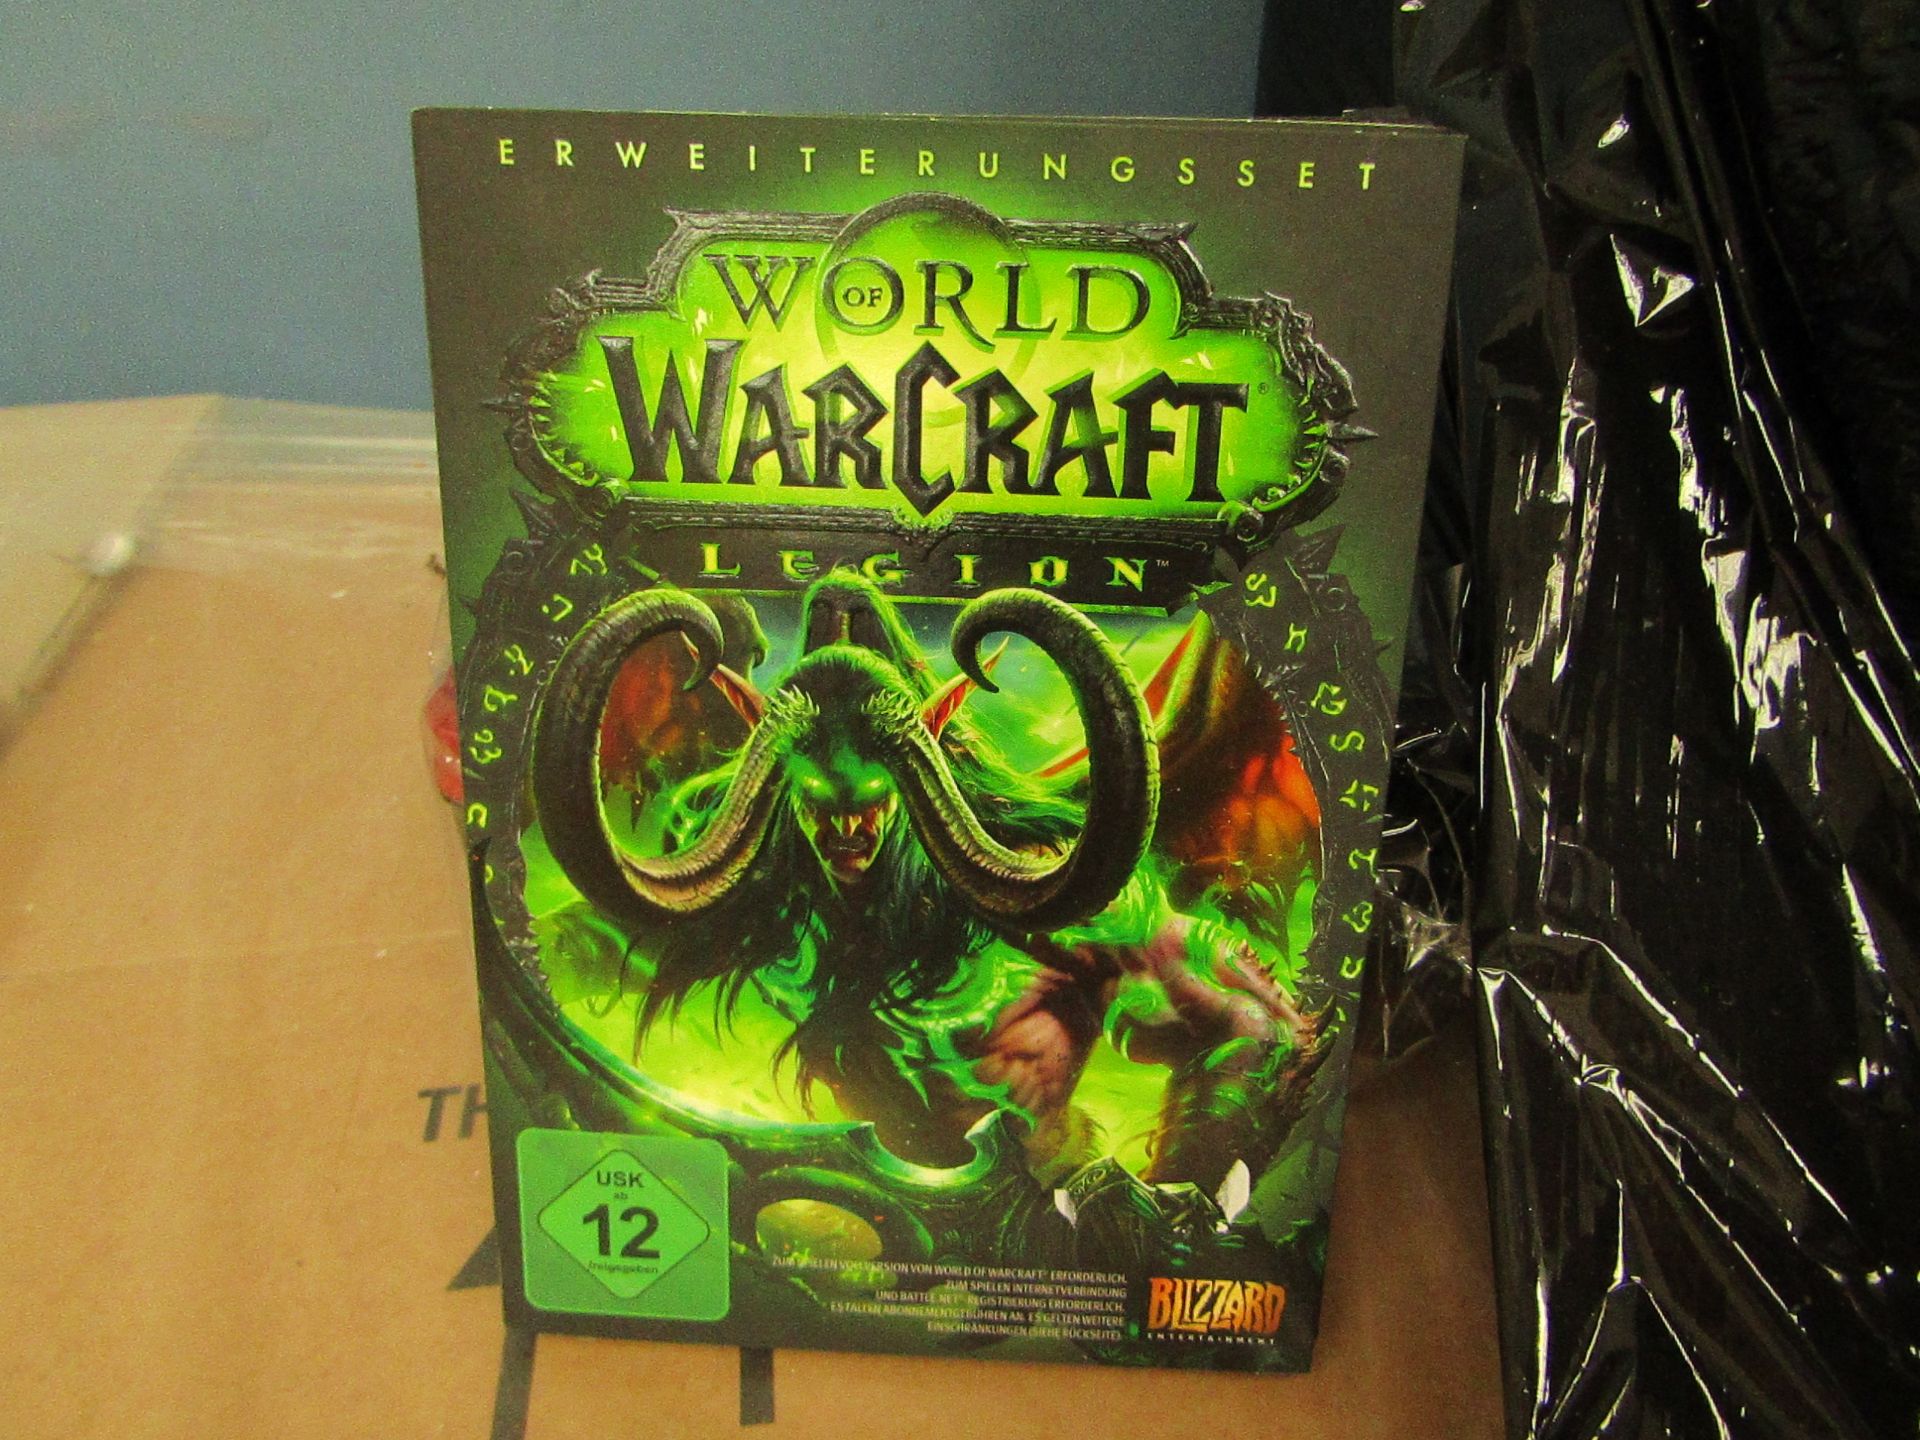 Blizzard - World of Warcraft - Legion Pc Game - Brand New Sealed & Packaged. Item is in Foreign